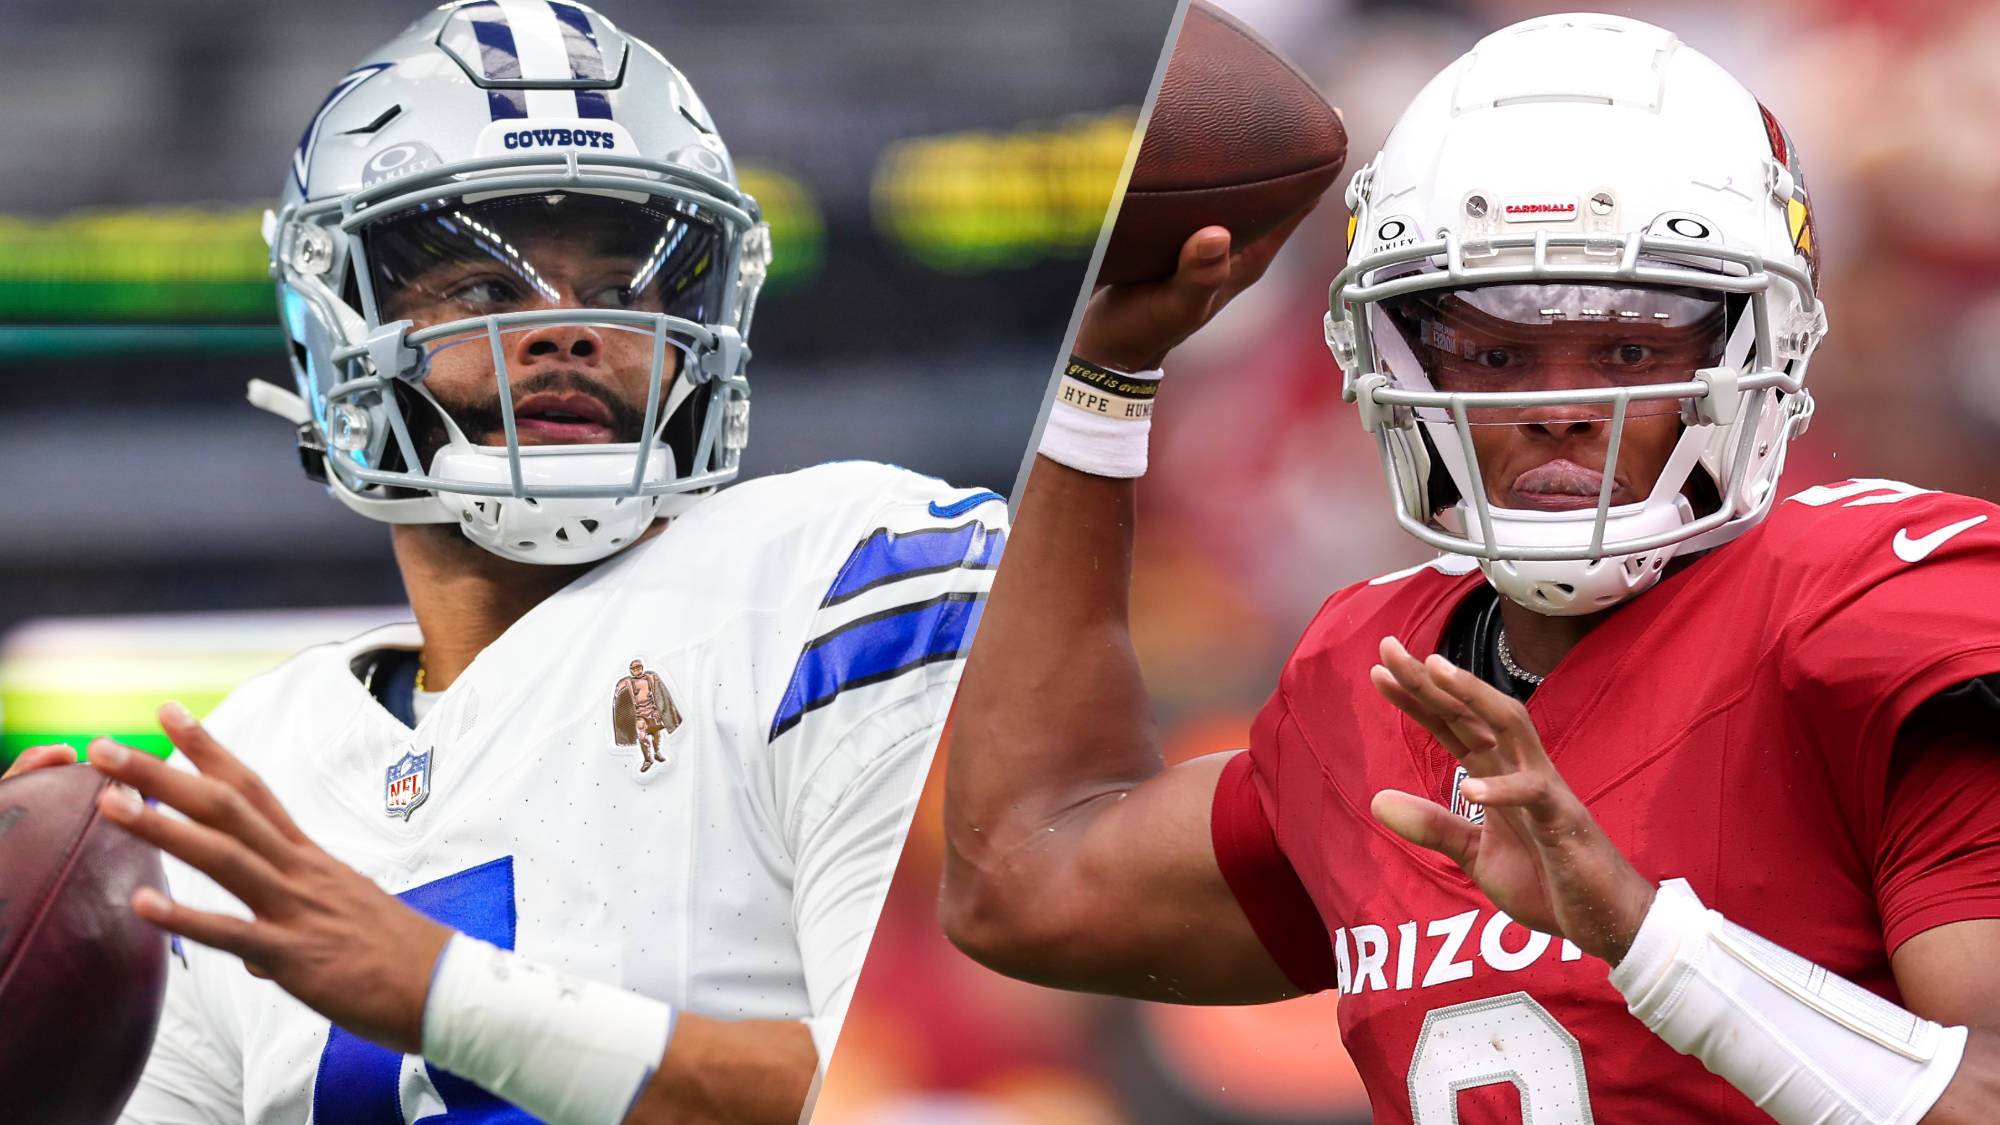 Cowboys vs Cardinals live stream: How to watch NFL week 3 online